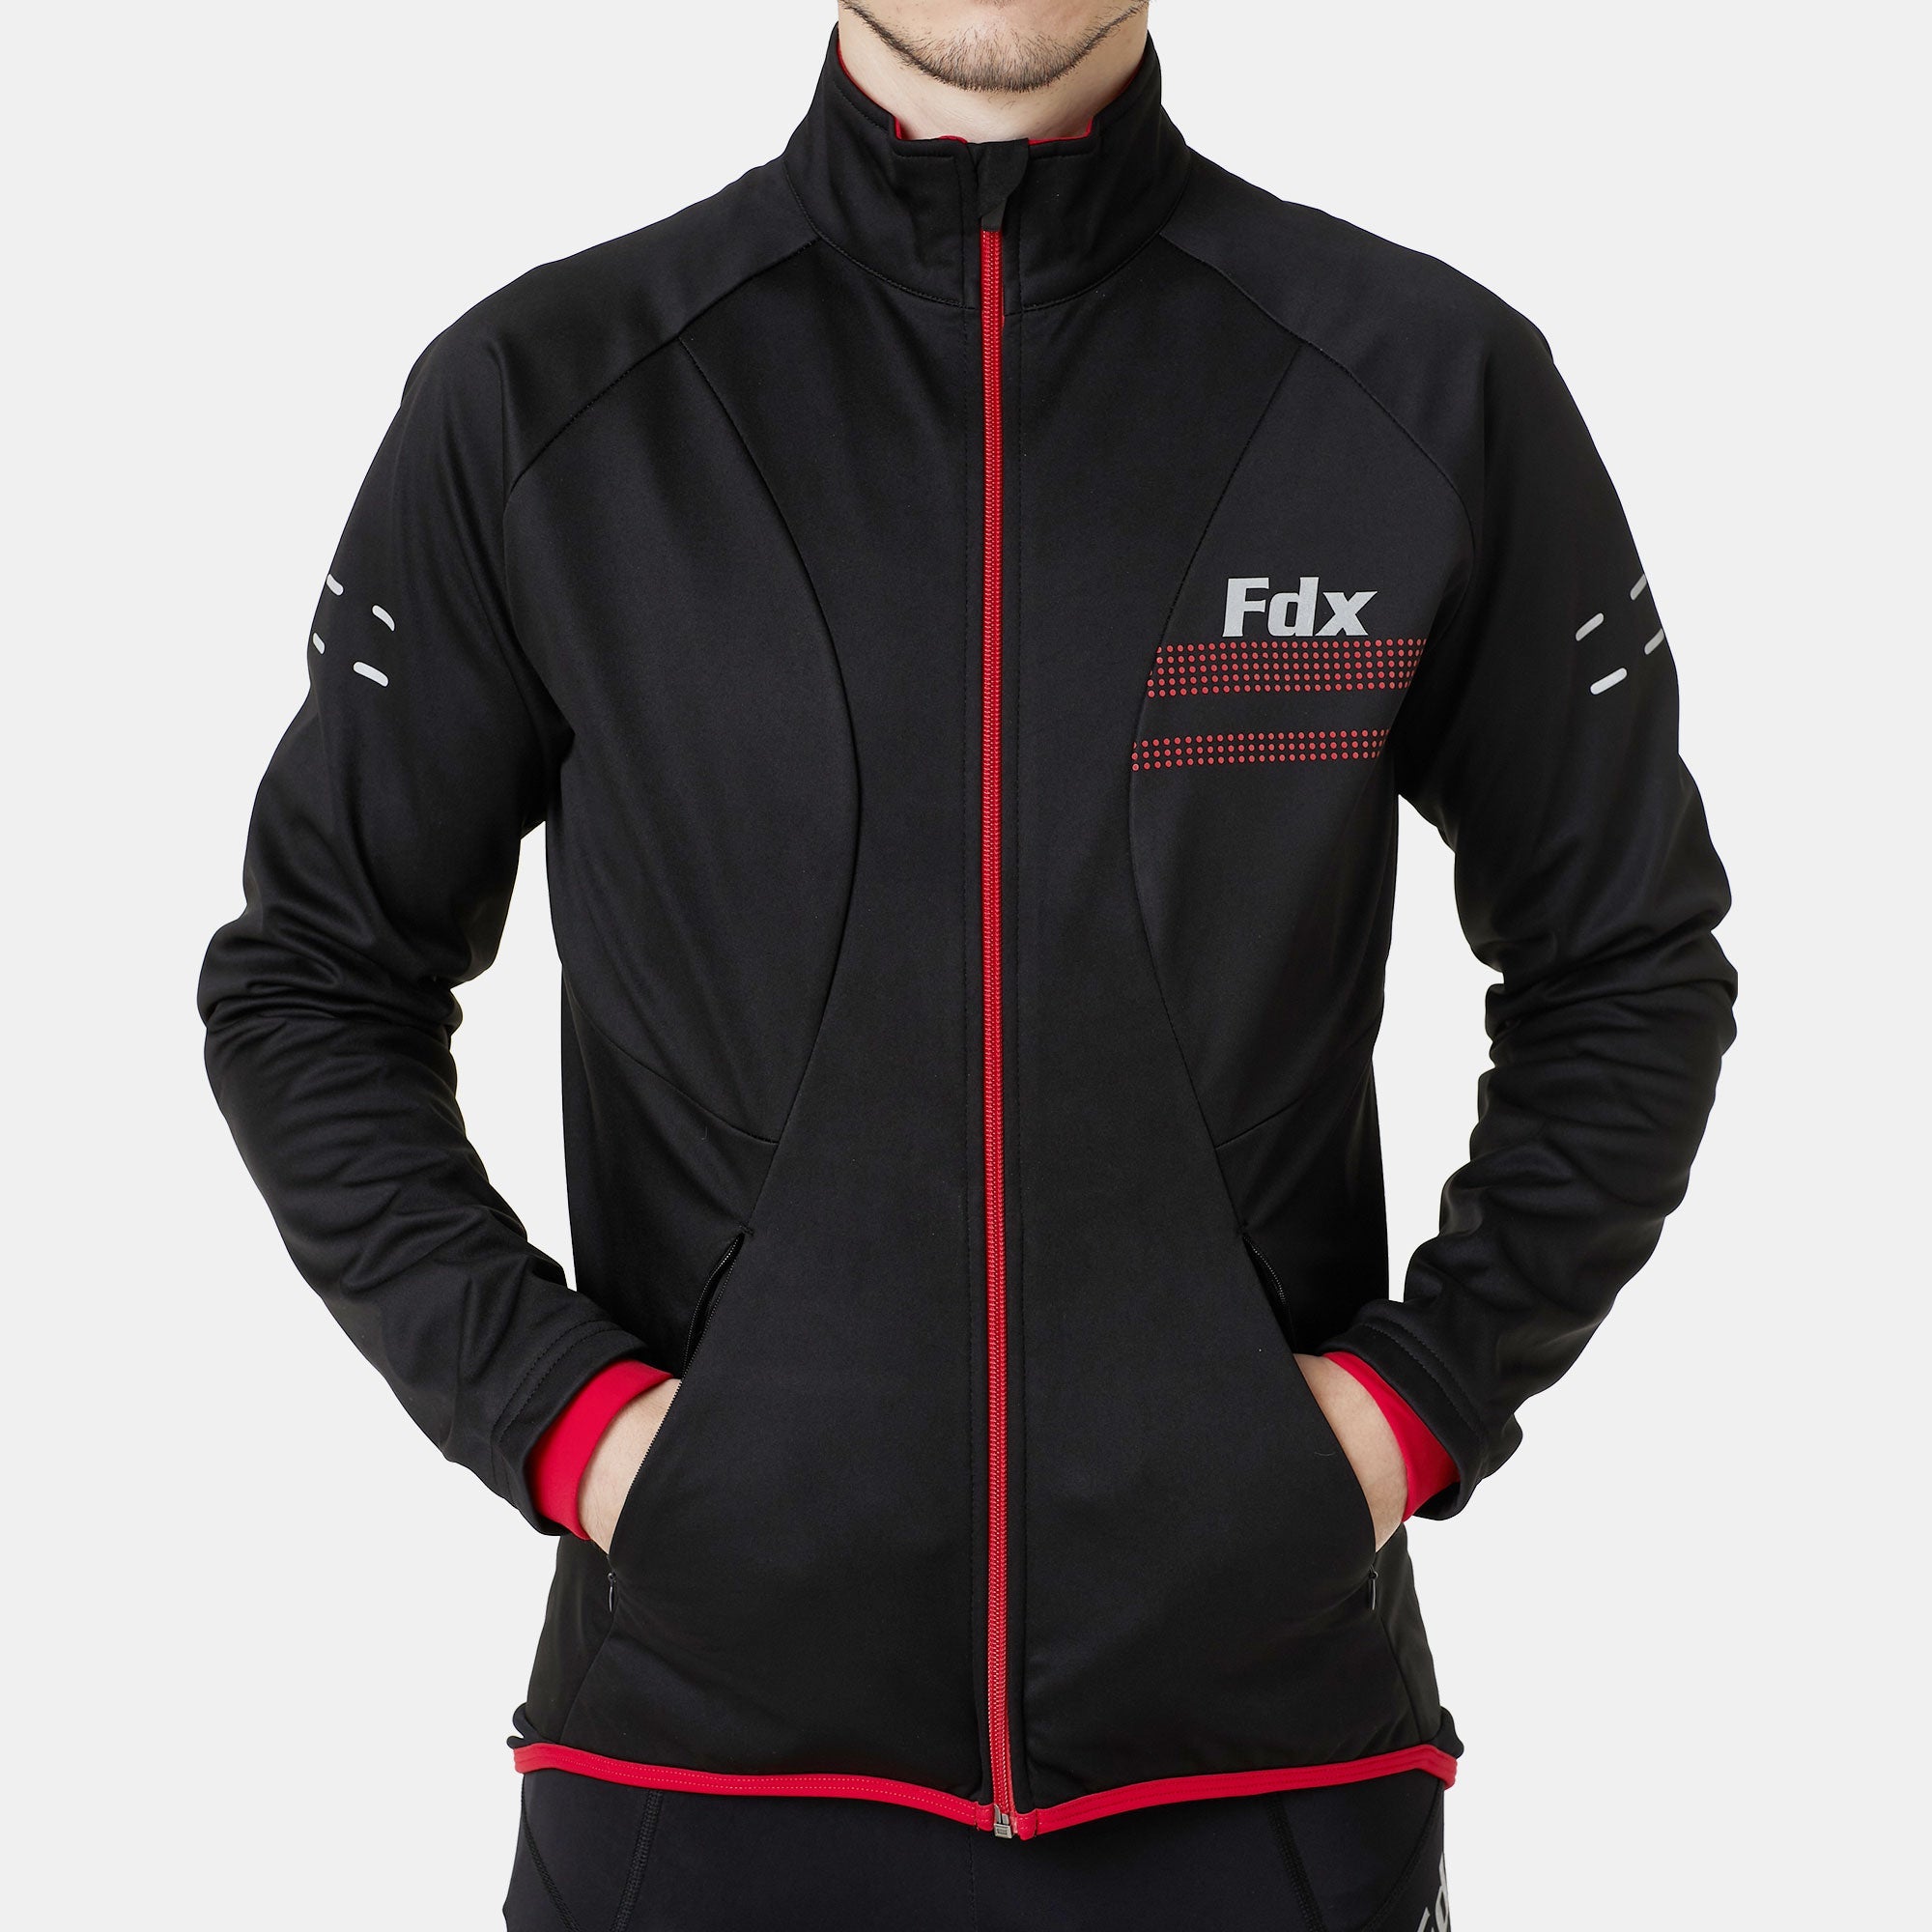 Fdx Men's Windbreaker Cycling Black & Red Jacket for Winter Thermal Casual Softshell Clothing Lightweight, Windproof, Waterproof & Pockets - Arch